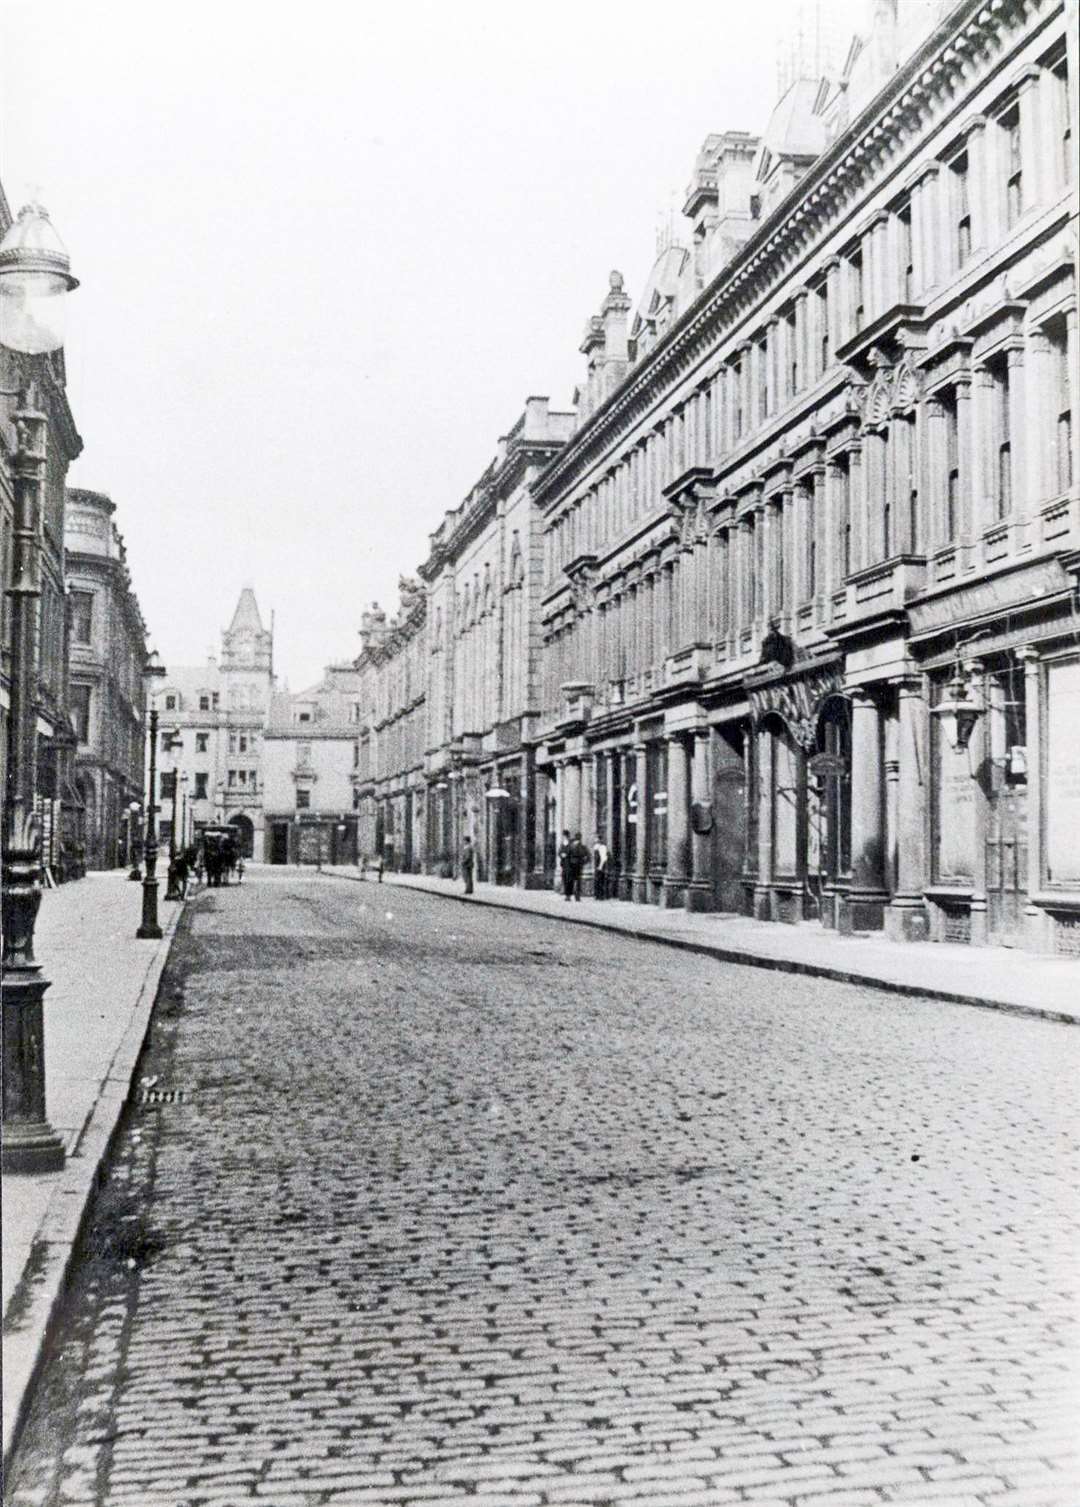 Union Street circa 1900 – pic courtesy of Highland Libraries/Am Baile